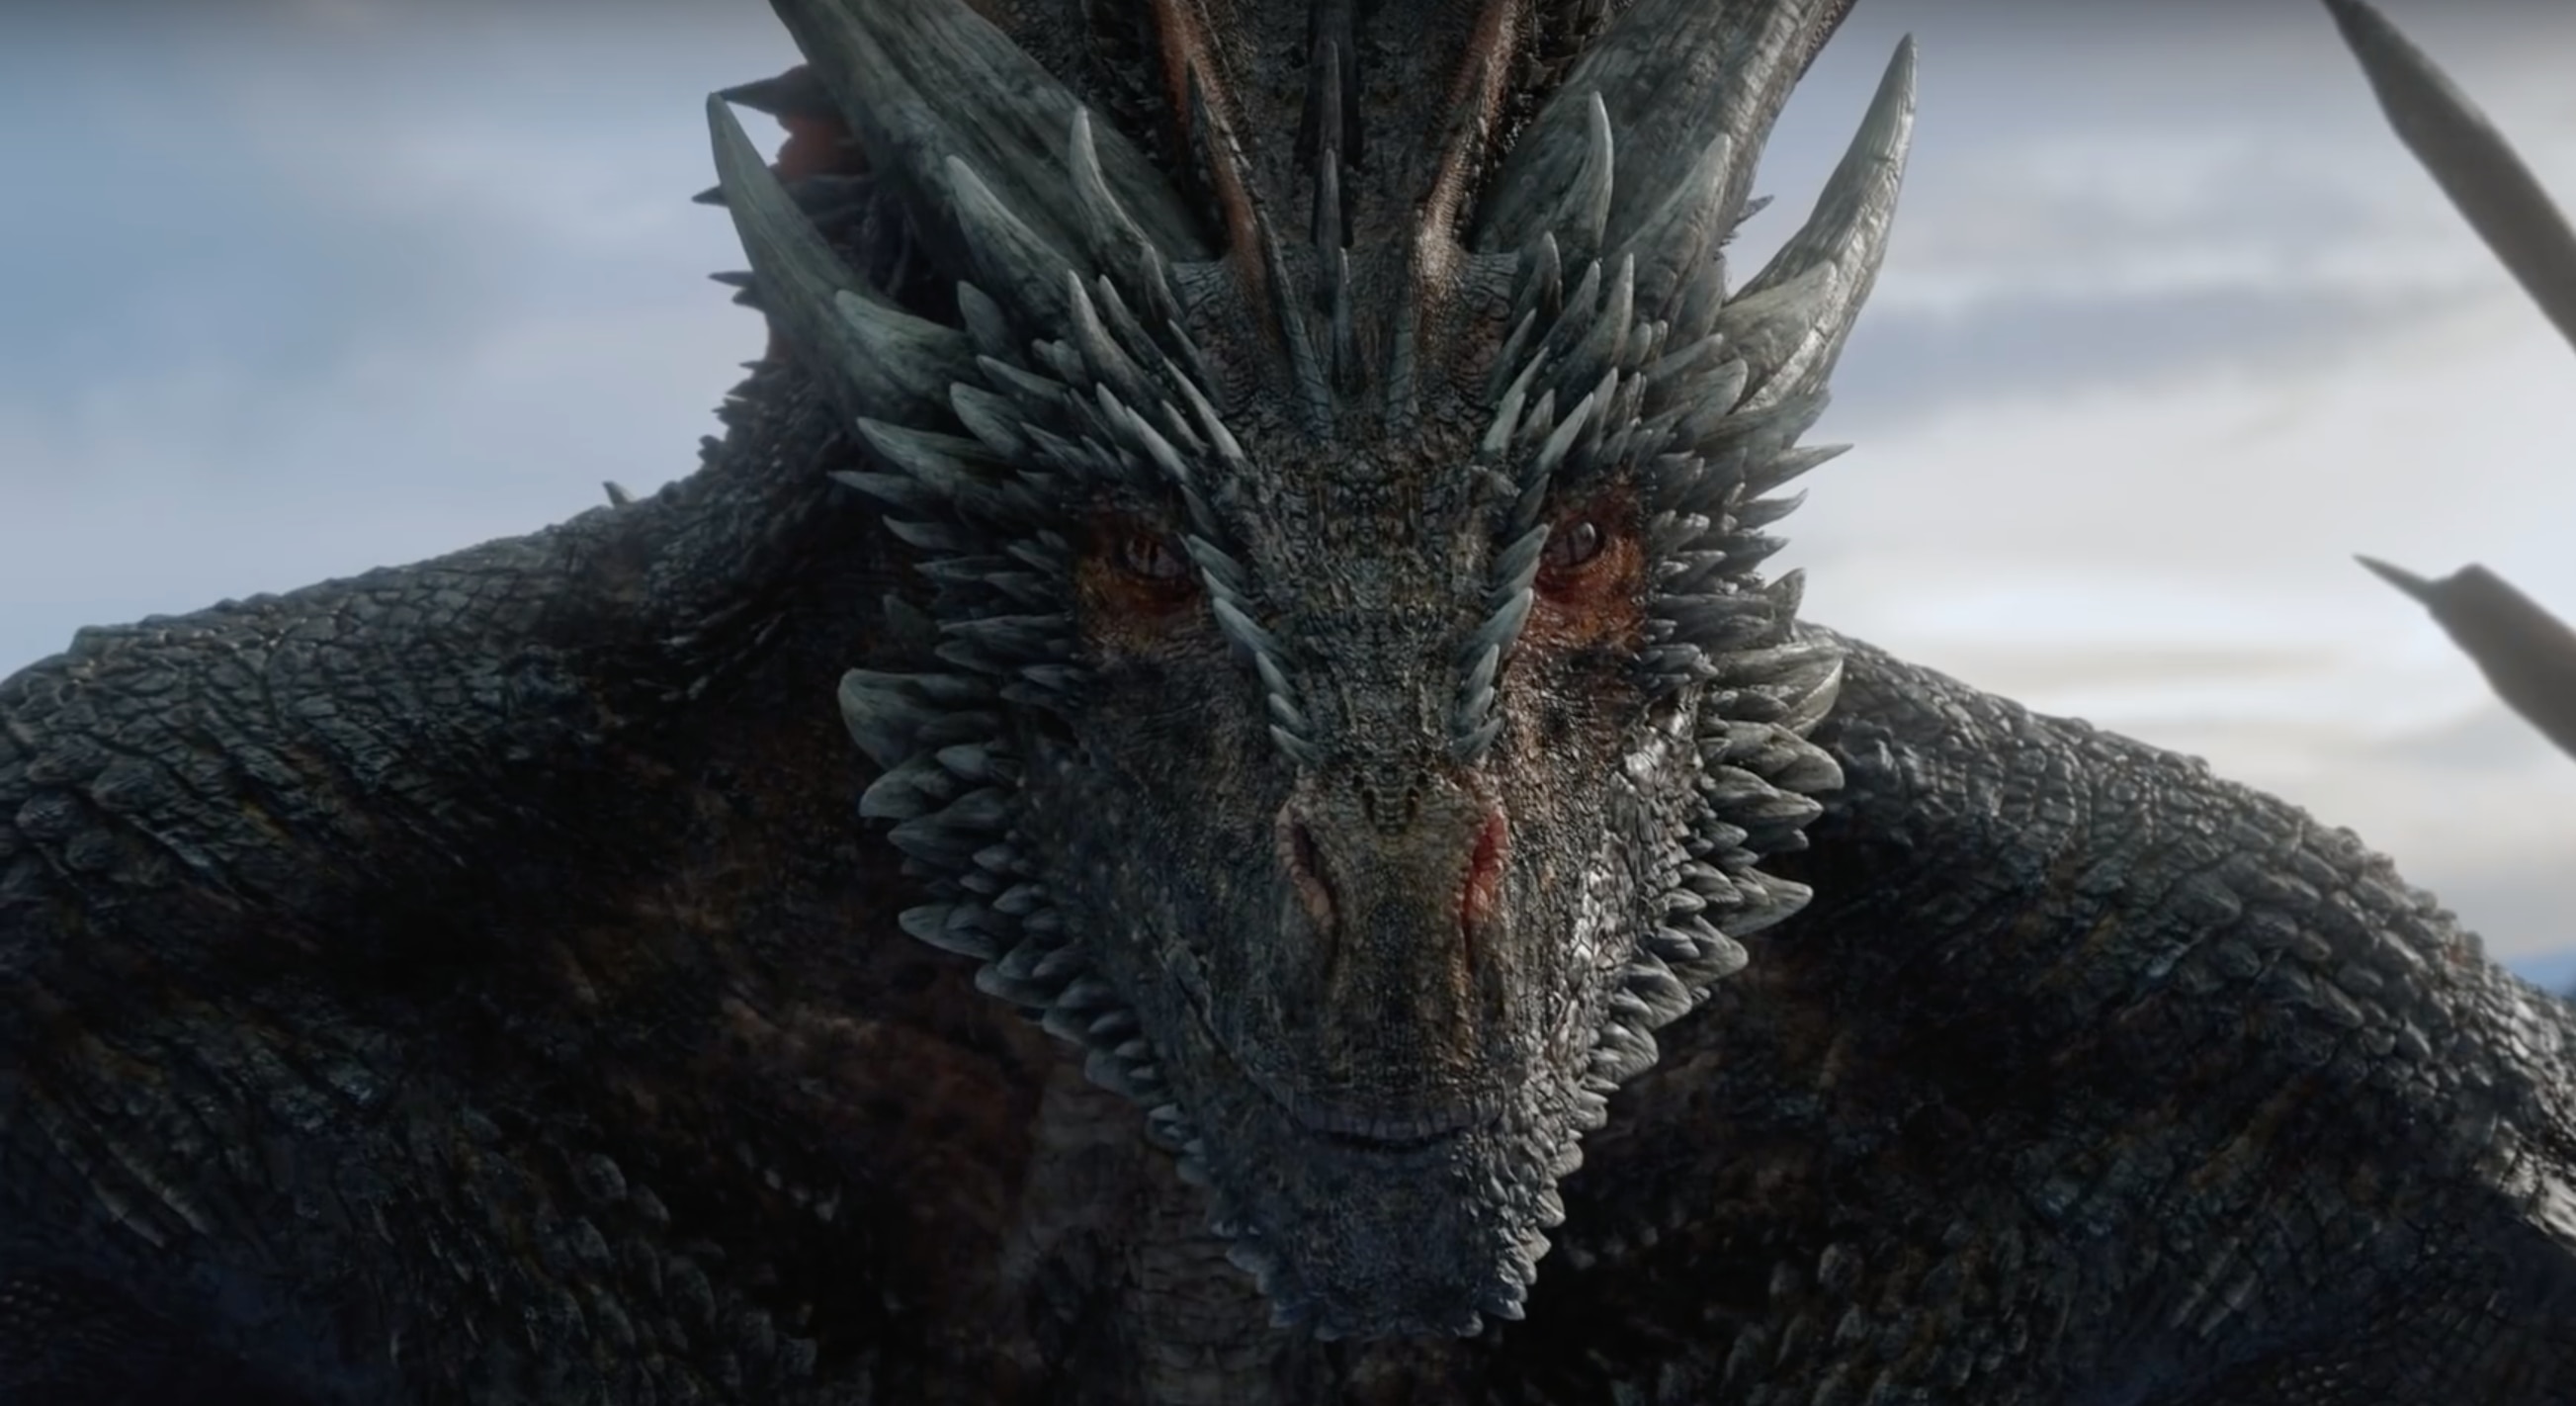 Game of Thrones' dragons are fiction, but could an existing animal breathe  fire? | SYFY WIRE